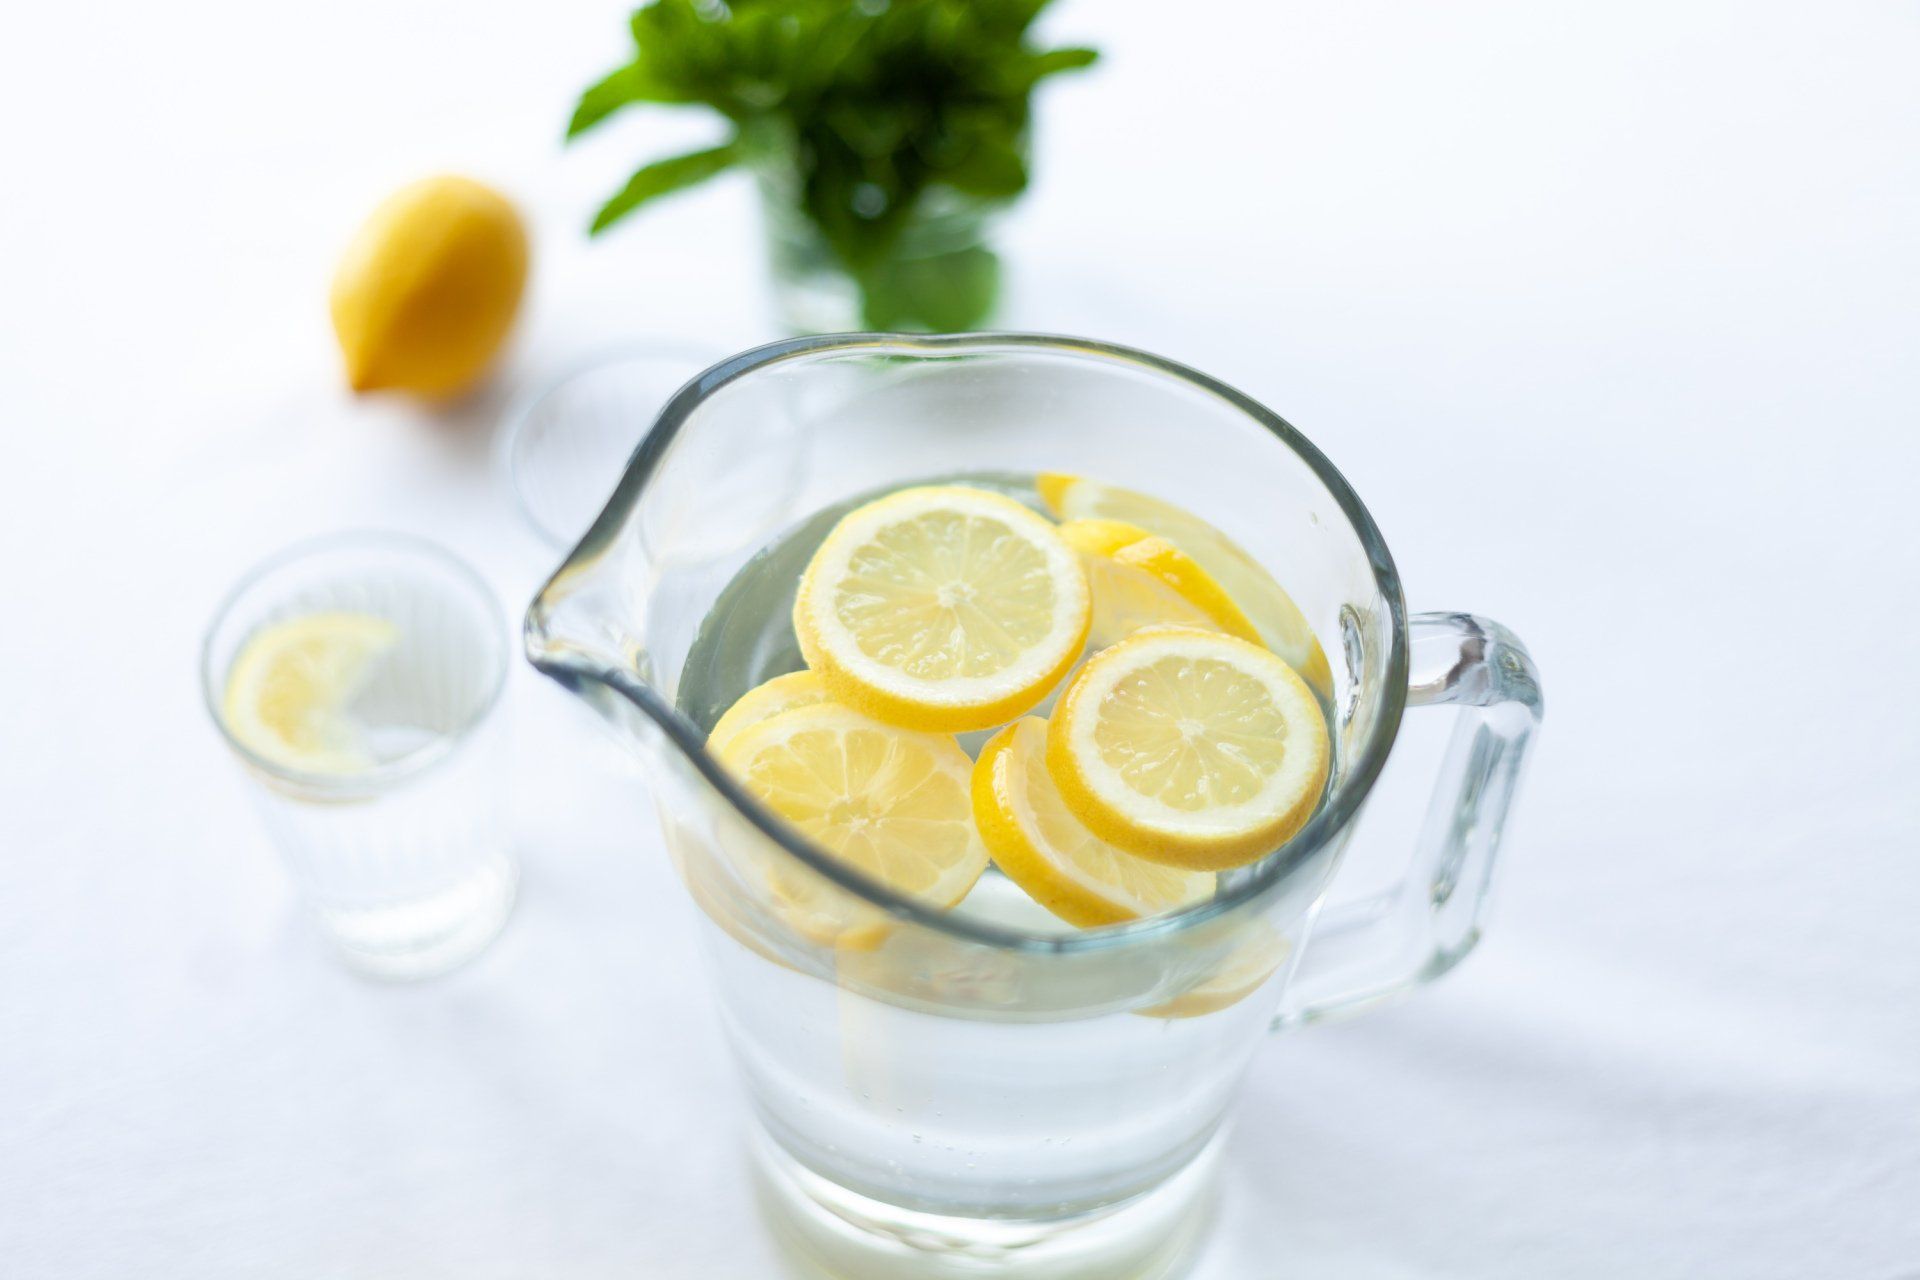 Pitcher of water with lemon slices in it